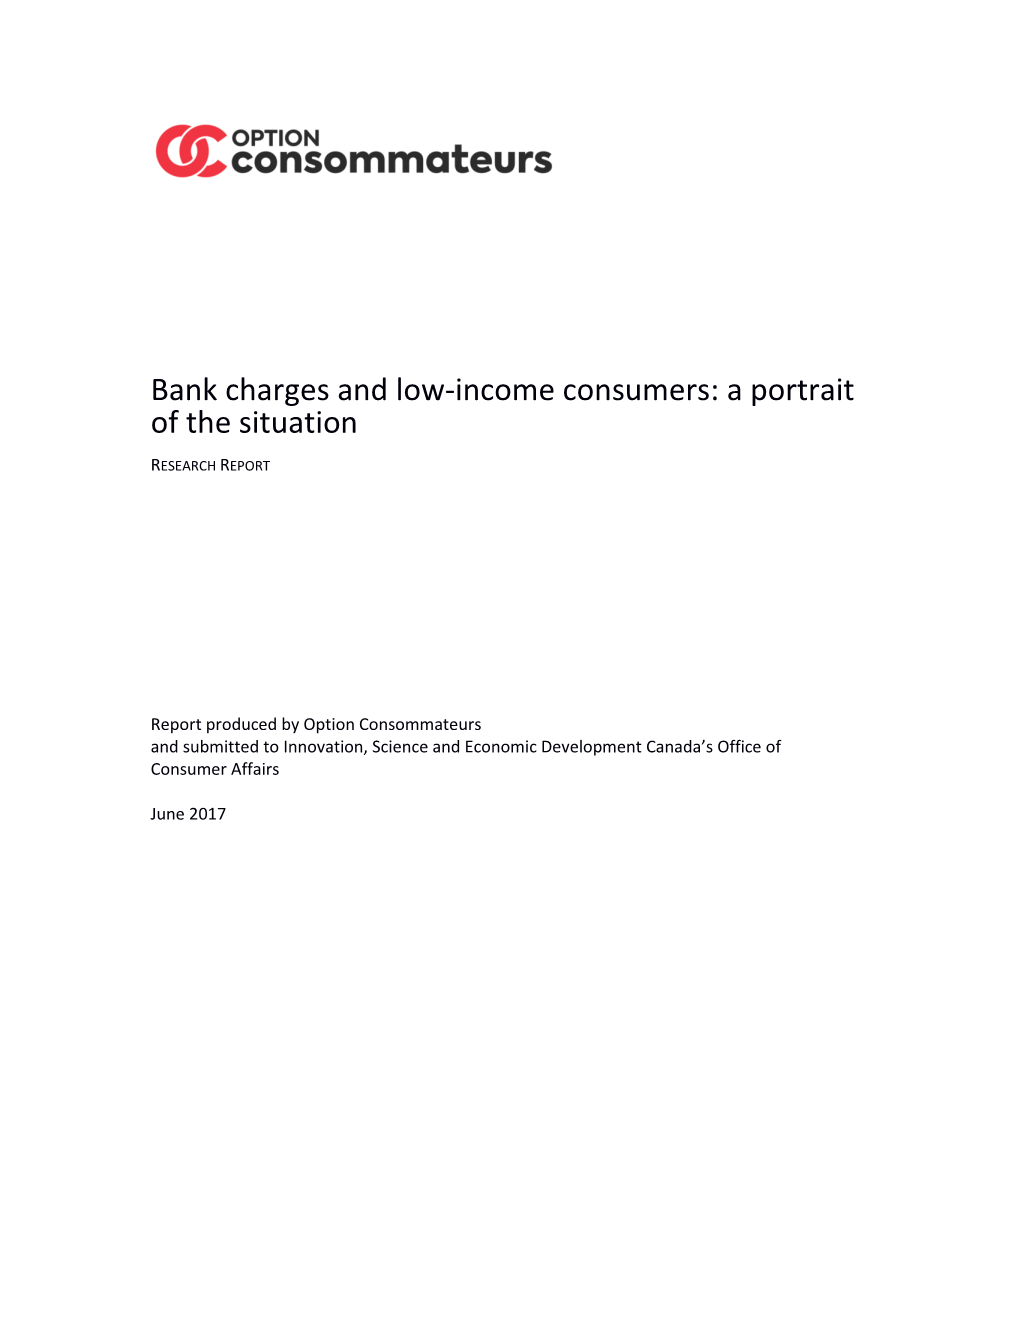 Bank Charges and Low-Income Consumers: a Portrait of the Situation